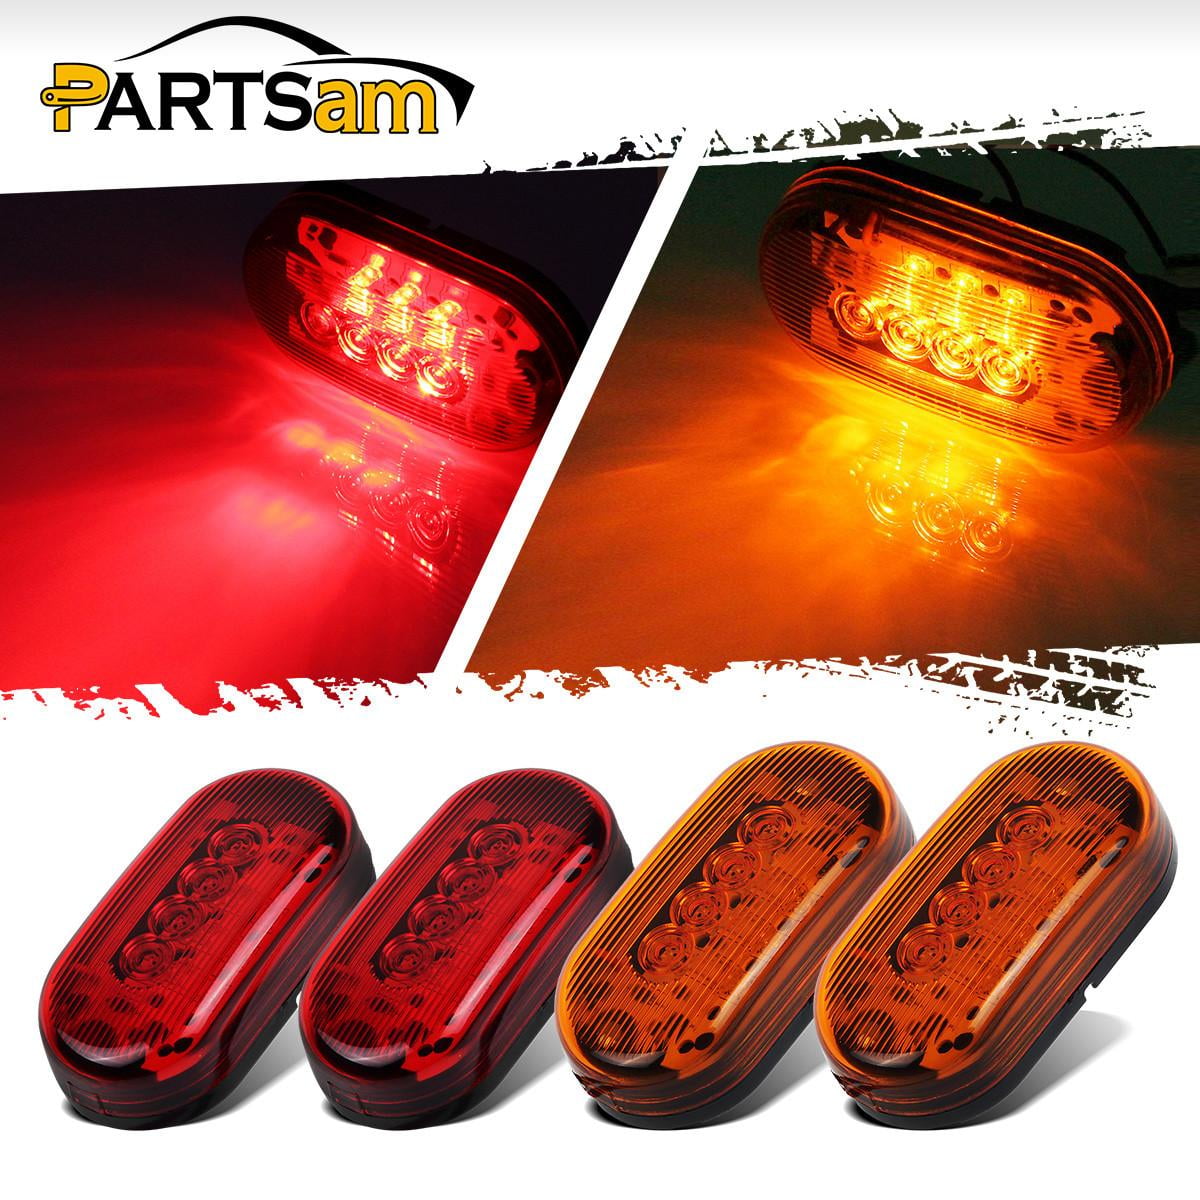 2-4/5 Red Square Truck Trailer Towing Led Light Side Reflector Stud Mount Accessories Partsam 4 Pcs Rectangular Led and Side Marker Lights with Reflex Lens 